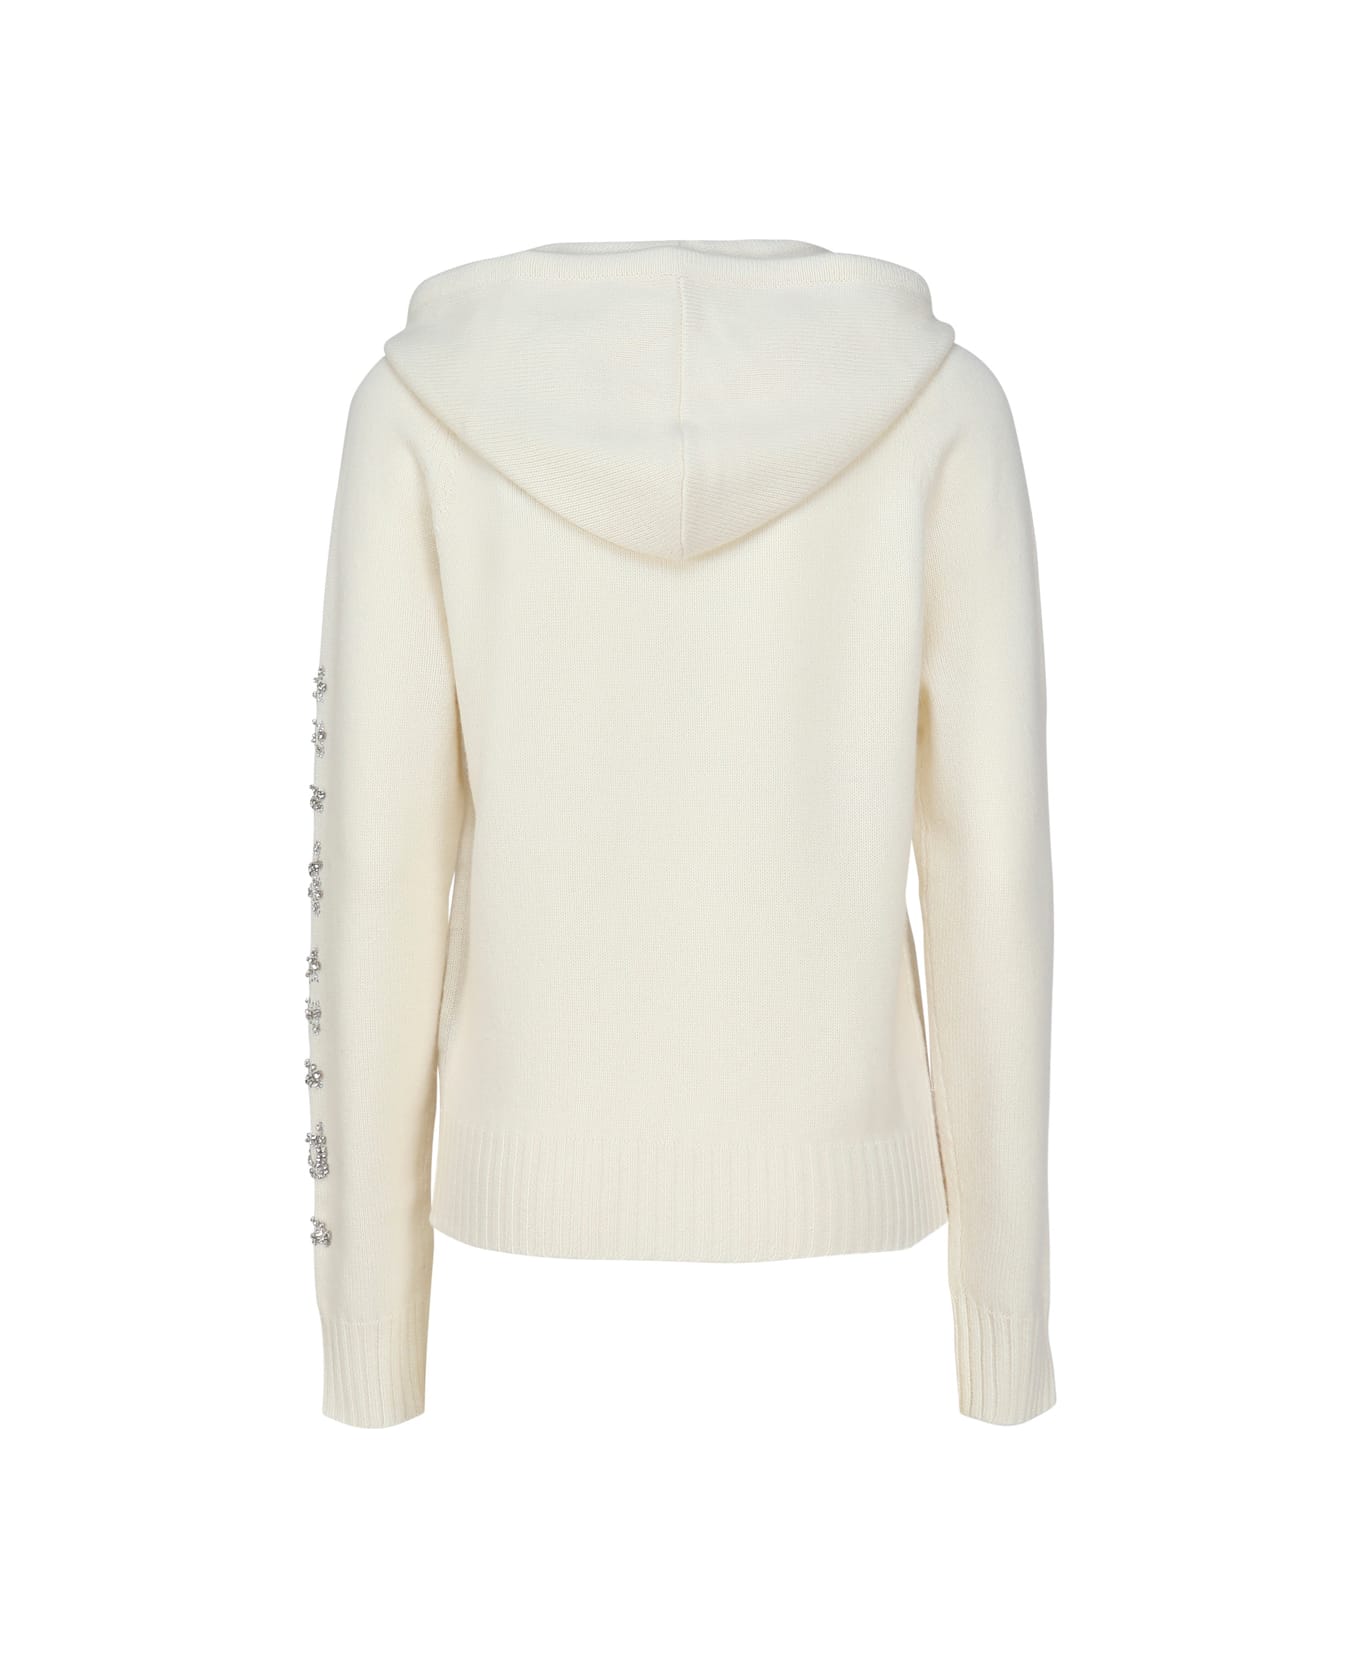 Max Mara Pineapple Sweater In Wool And Cashmere - White